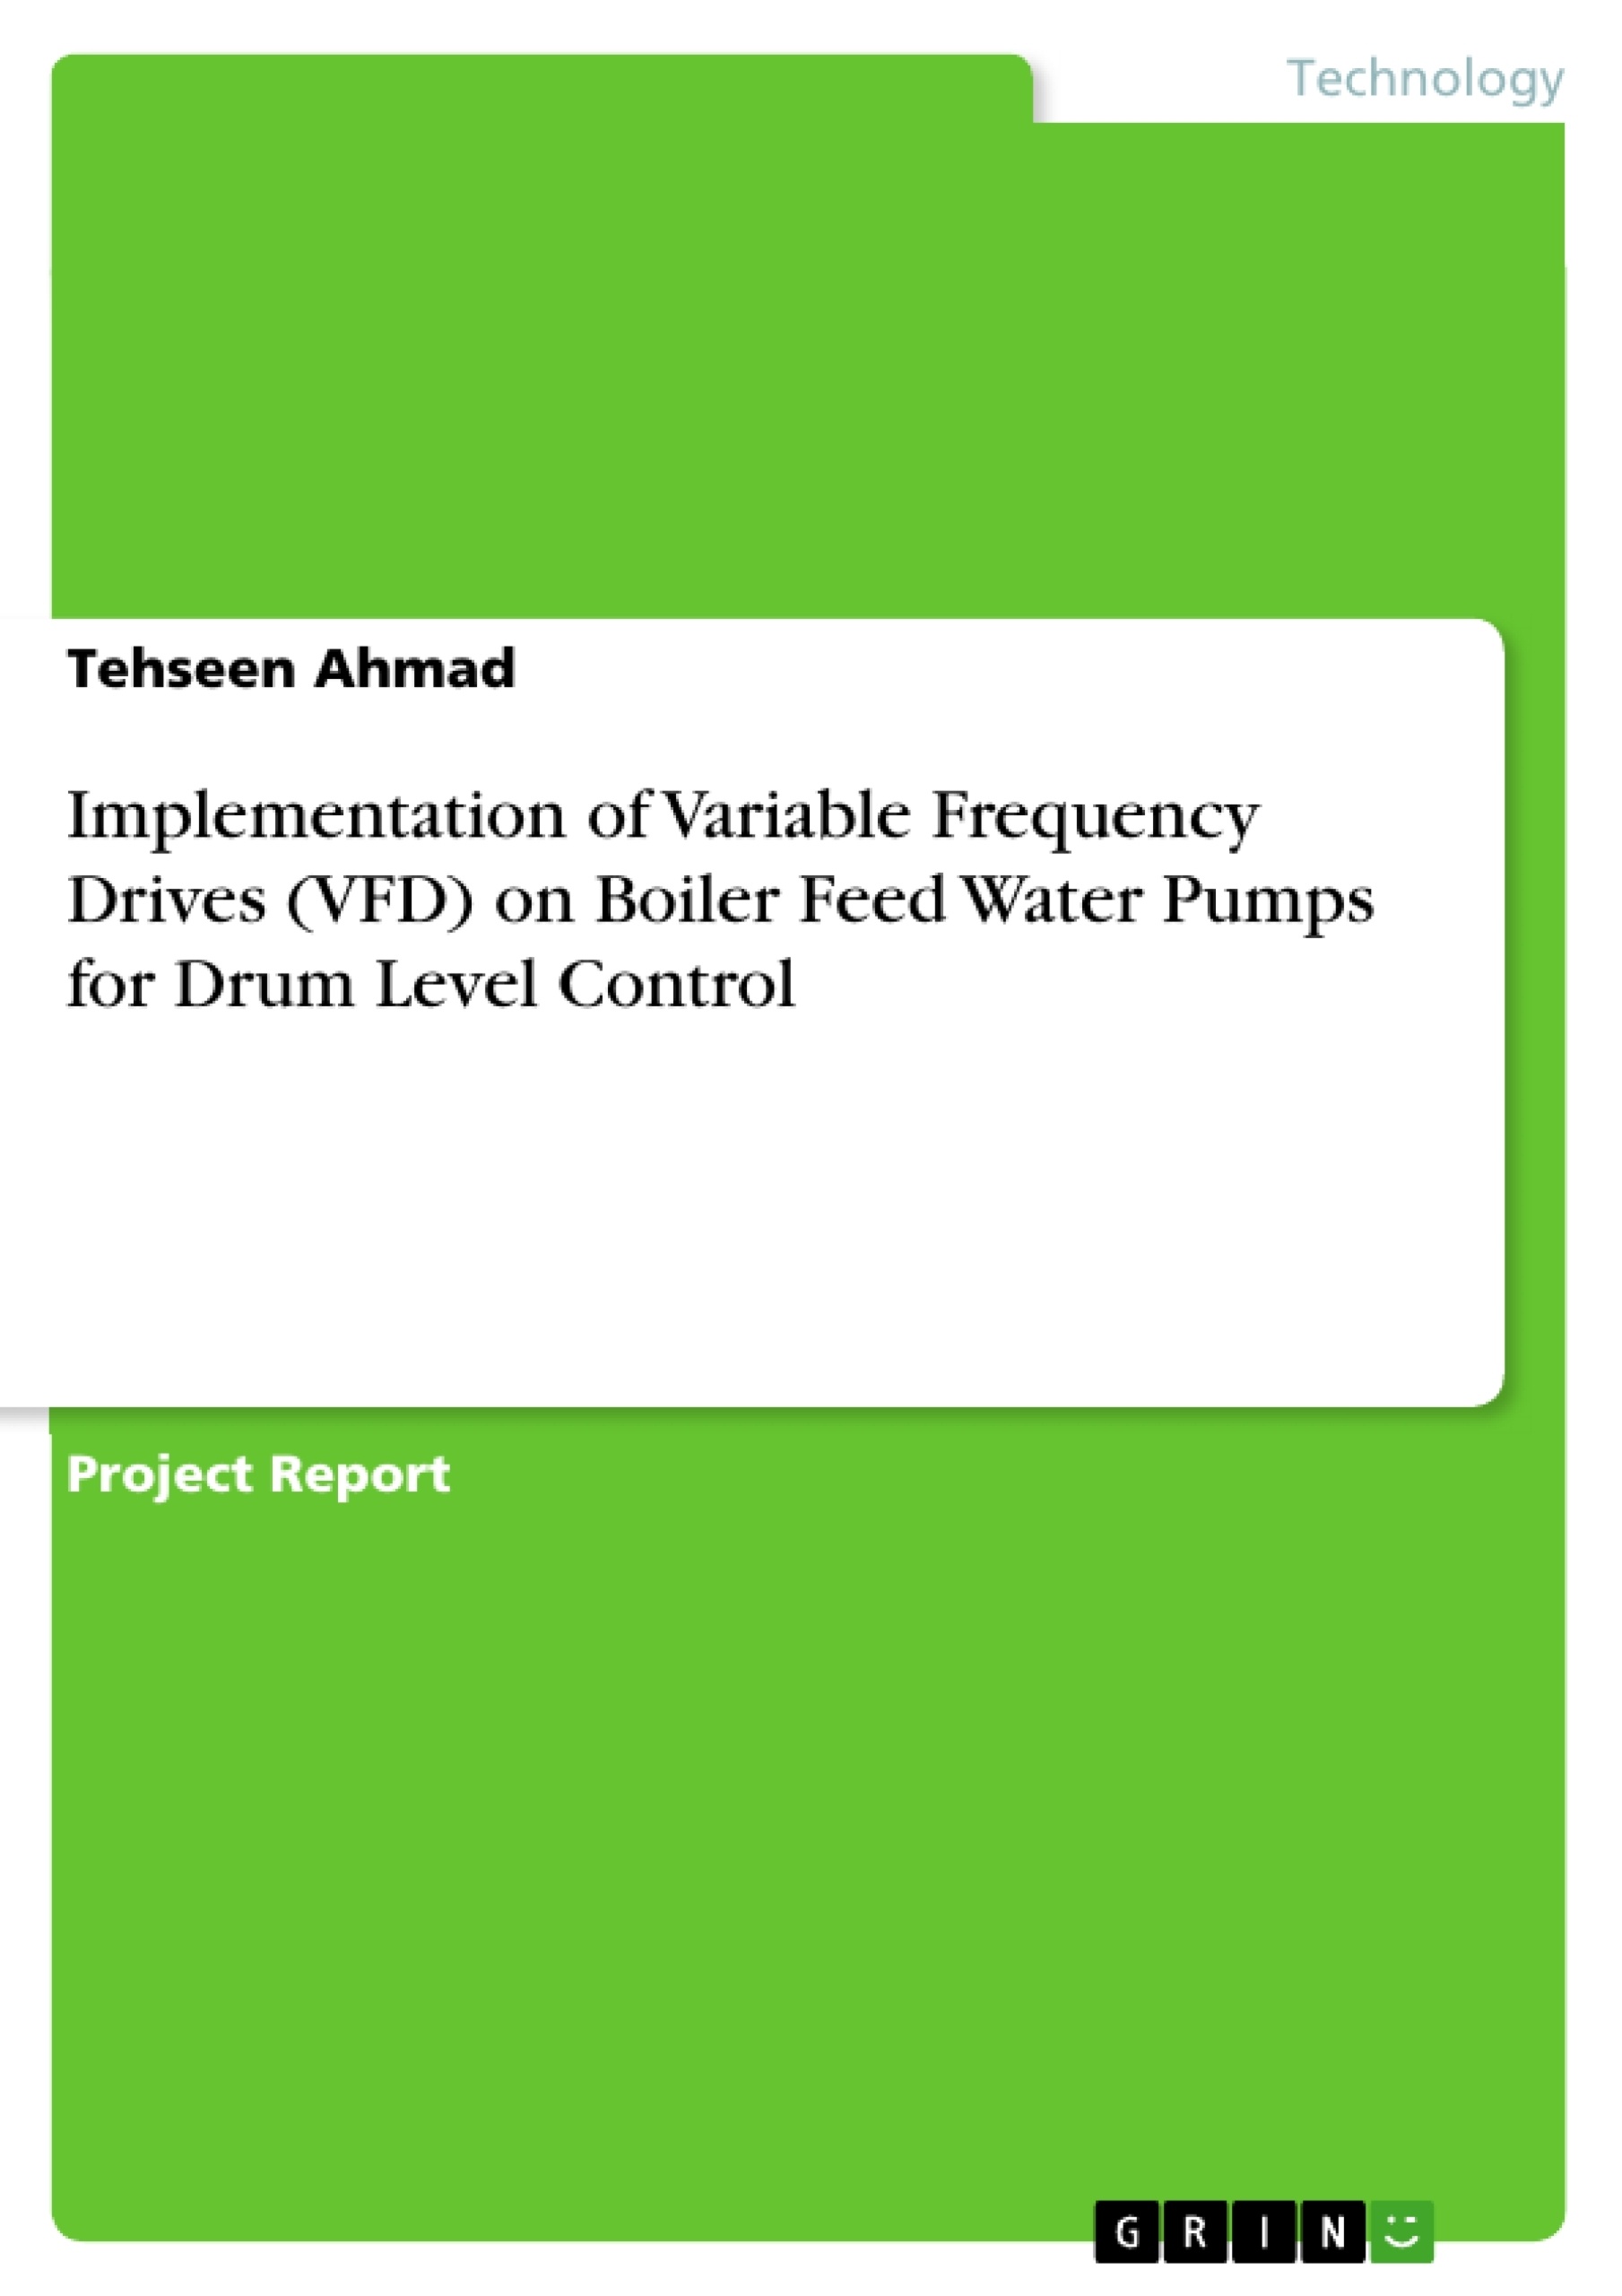 Titre: Implementation of Variable Frequency Drives (VFD) on Boiler Feed Water Pumps for Drum Level Control